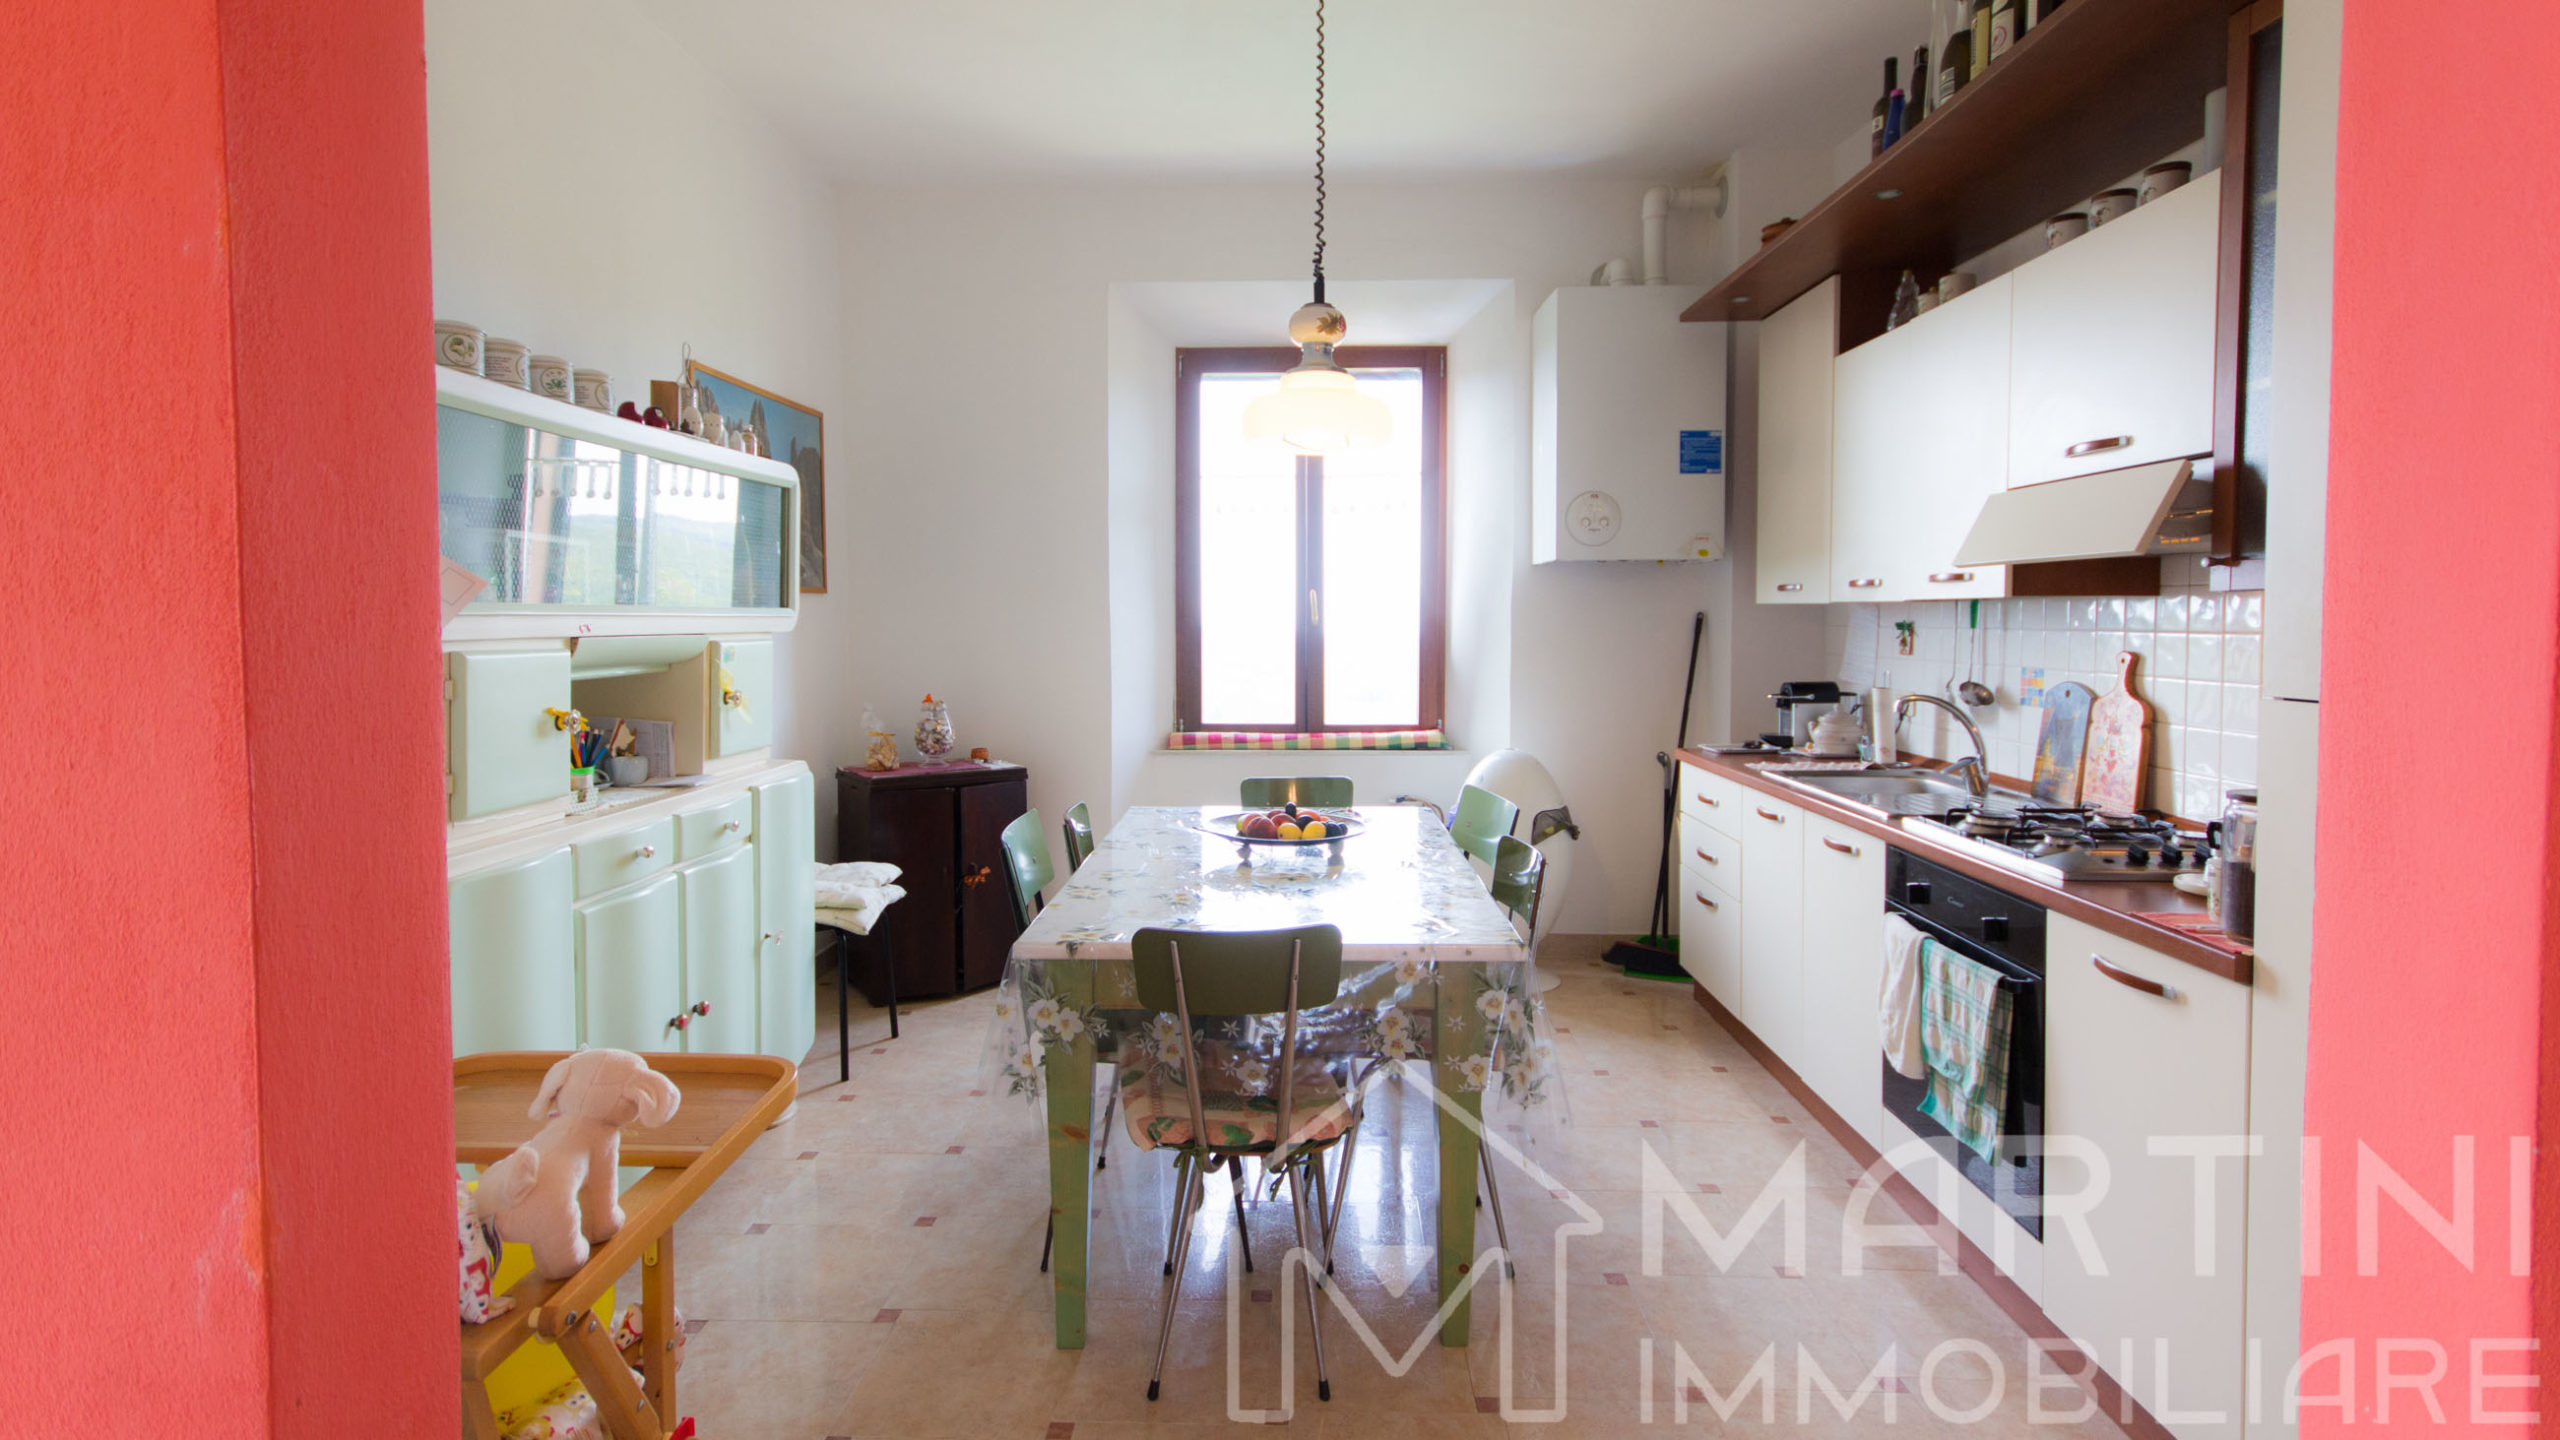 Renovated Apartment For Sale with Terrace and View